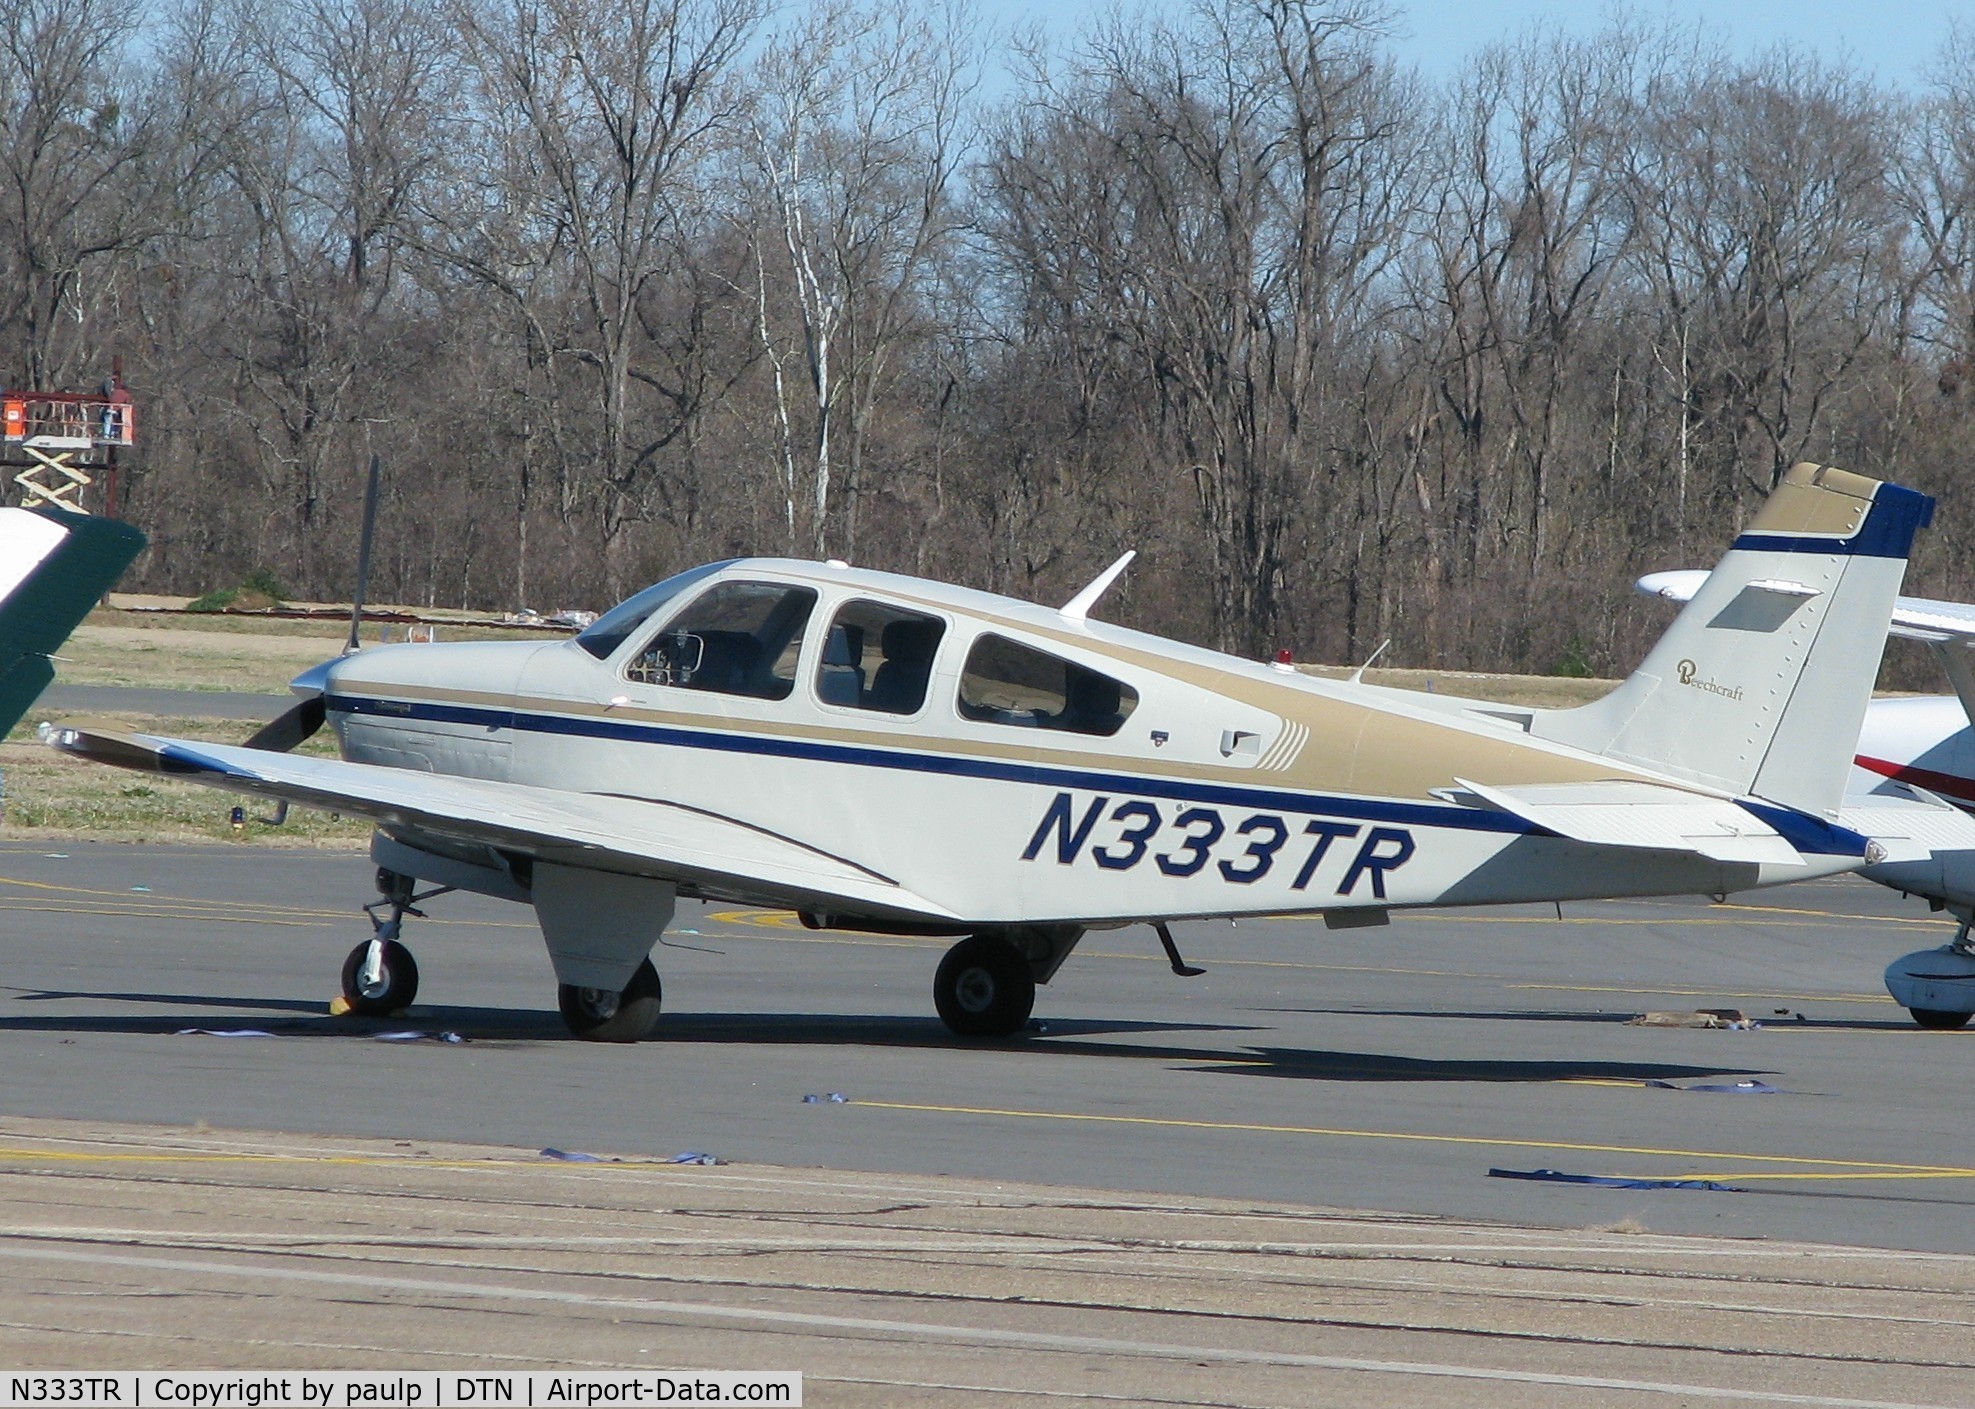 N333TR, 1979 Beech F33A Bonanza C/N CE-860, Parked at the Downtown Shreveport airport.